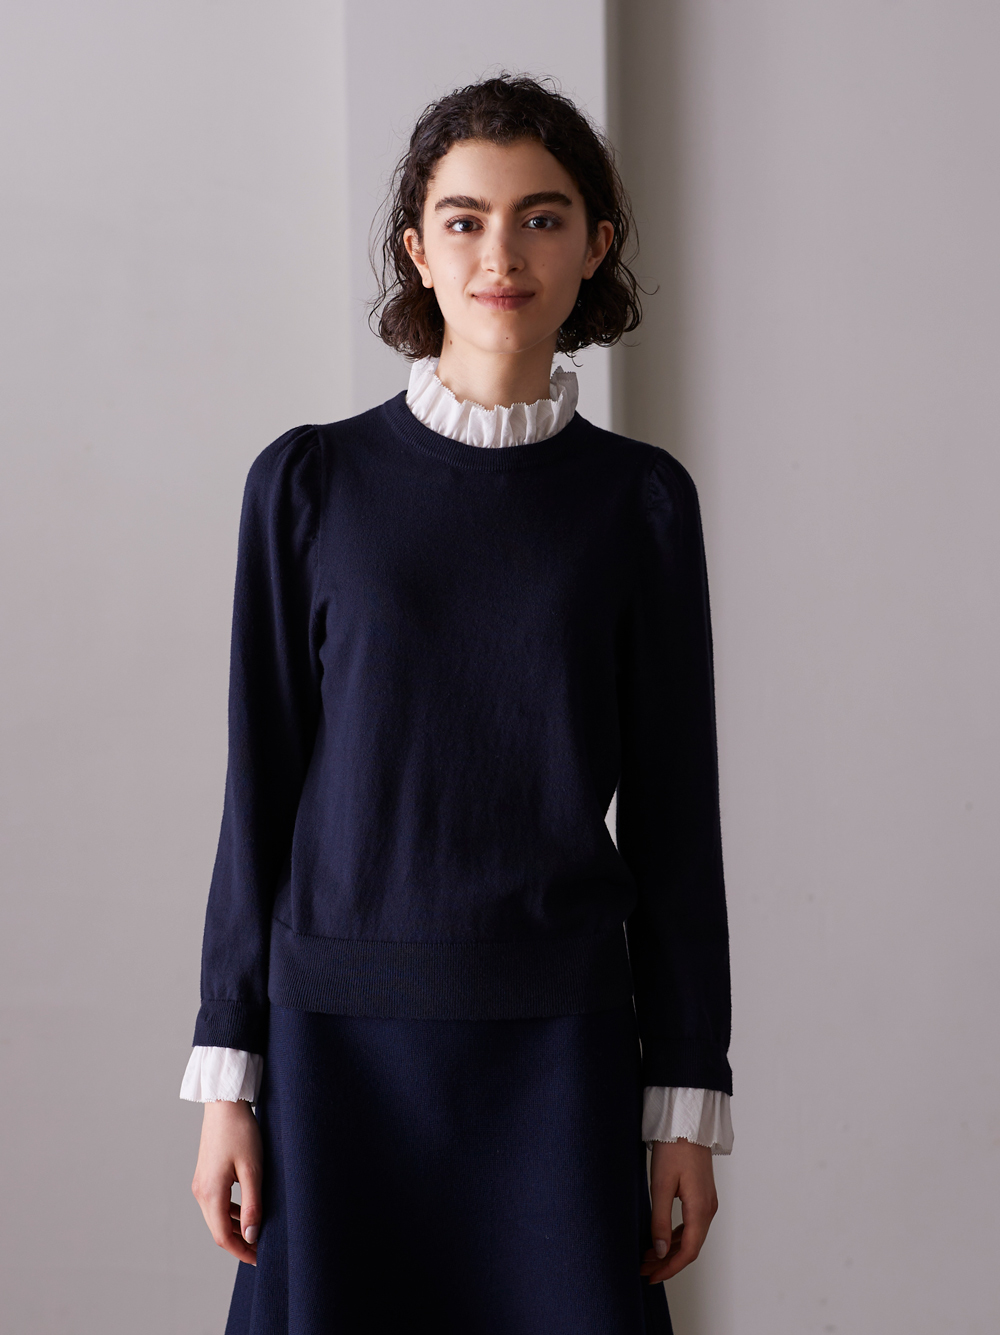 high necked frill knit|WALANCE MARILYN MOON OFFICIAL ONLINESHOP